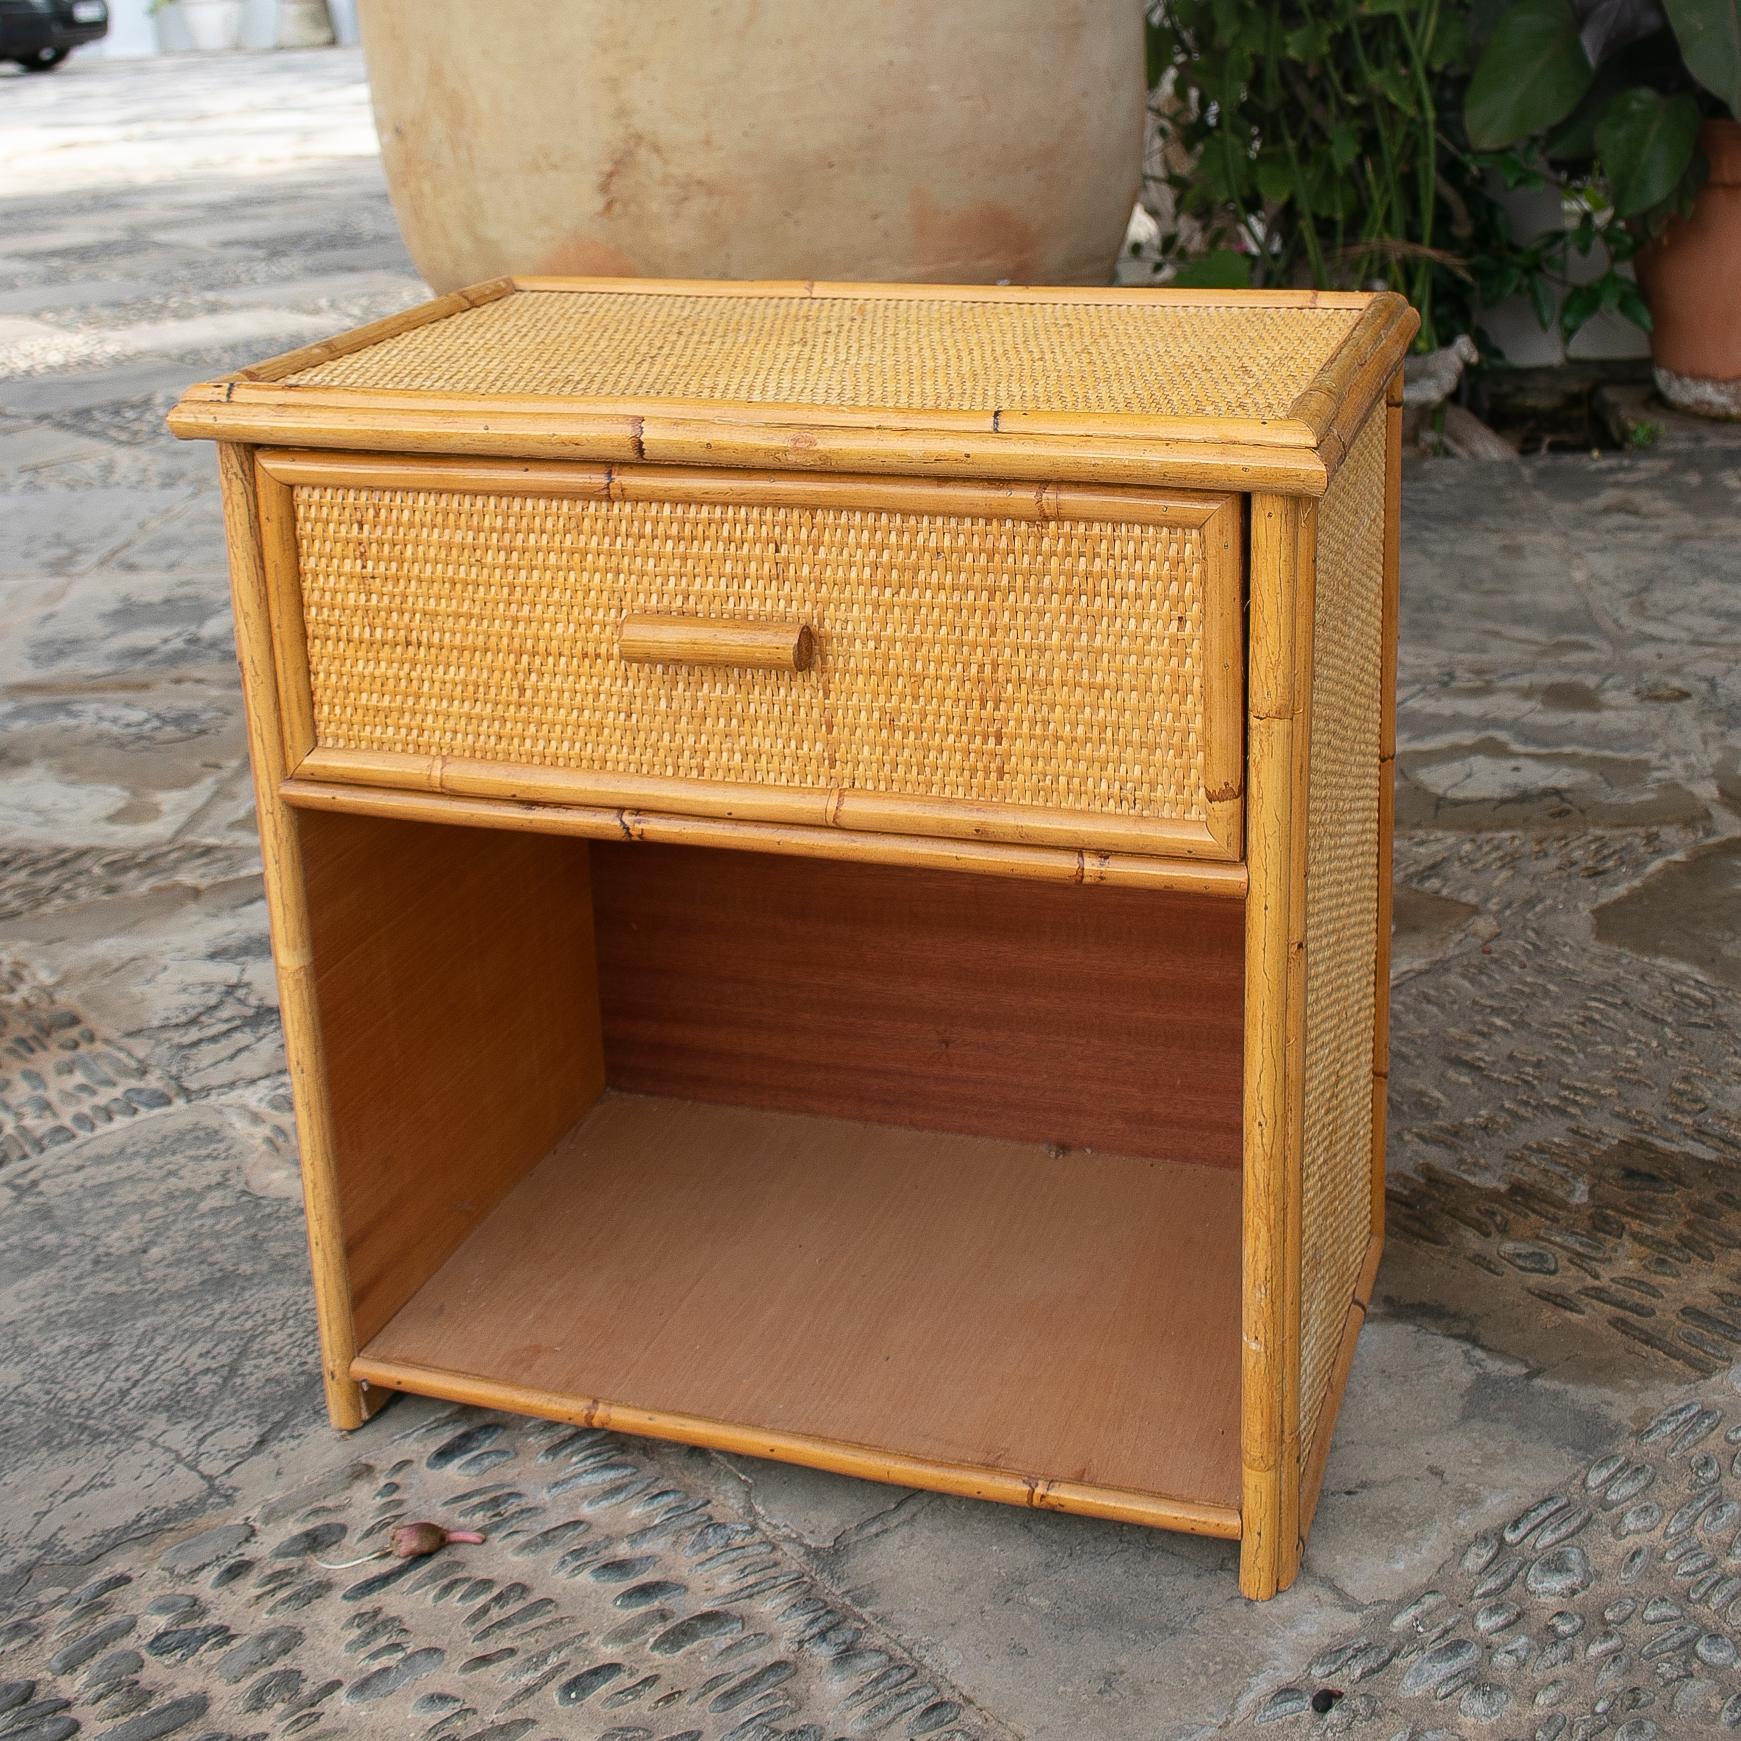 1970s Spanish bamboo and rattan bedside table with drawers.